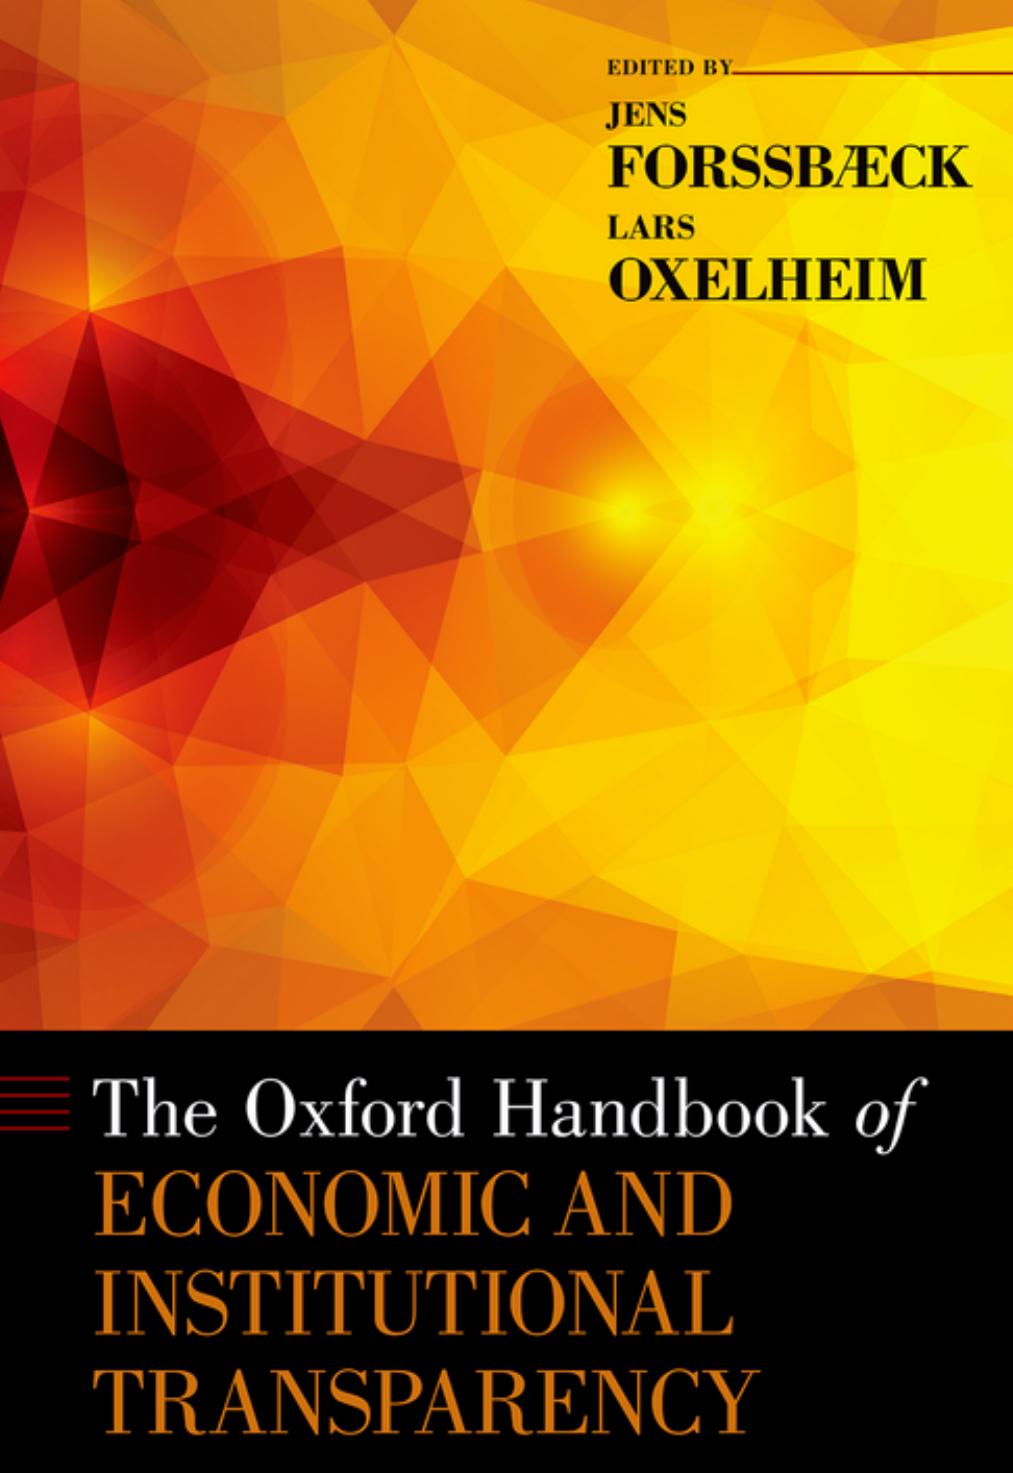 The Oxford Handbook of Economic and Institutional Transparency